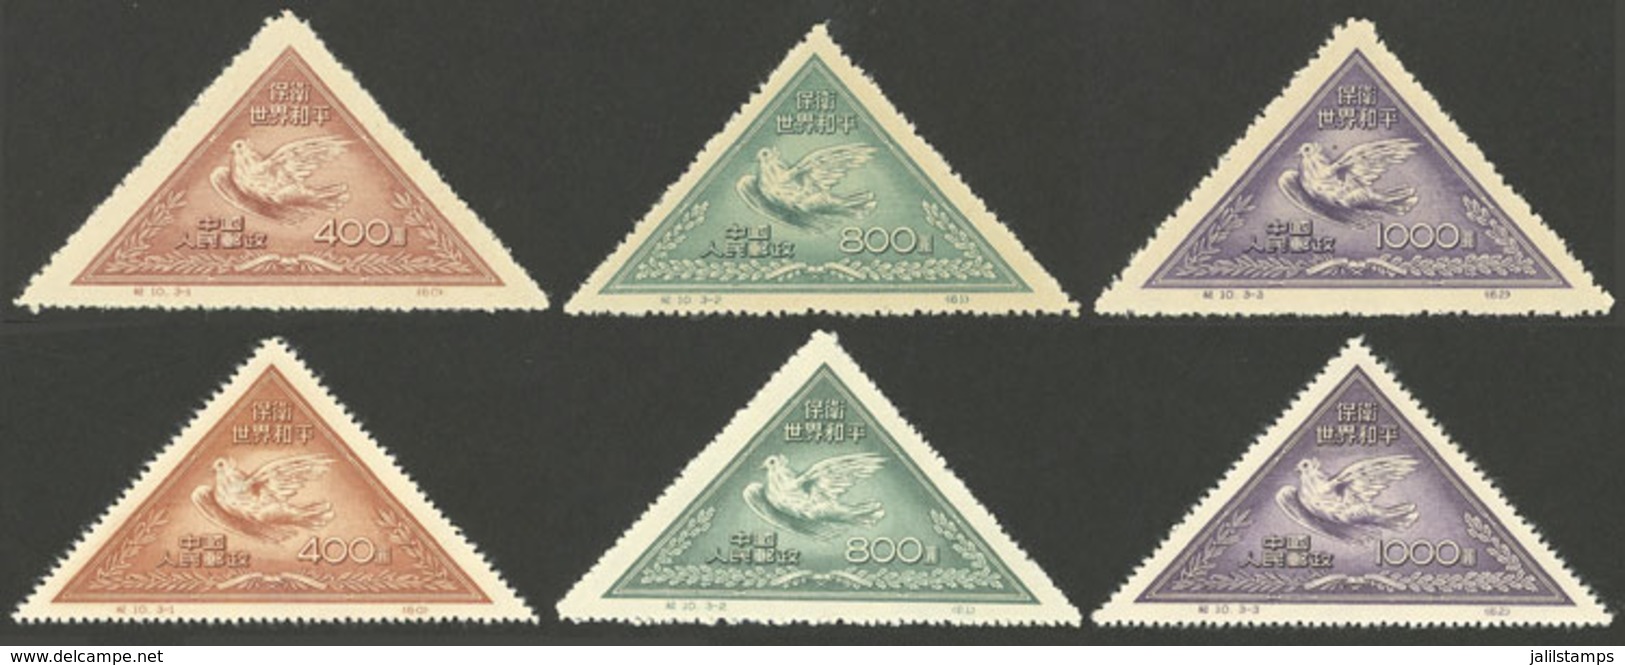 CHINA: Sc.108/110, 1951 Dove, World Peace, Cmpl. Set Of 3 Values, Mint Very Lightly Hinged (issued Without Gum), ORIGINA - Used Stamps